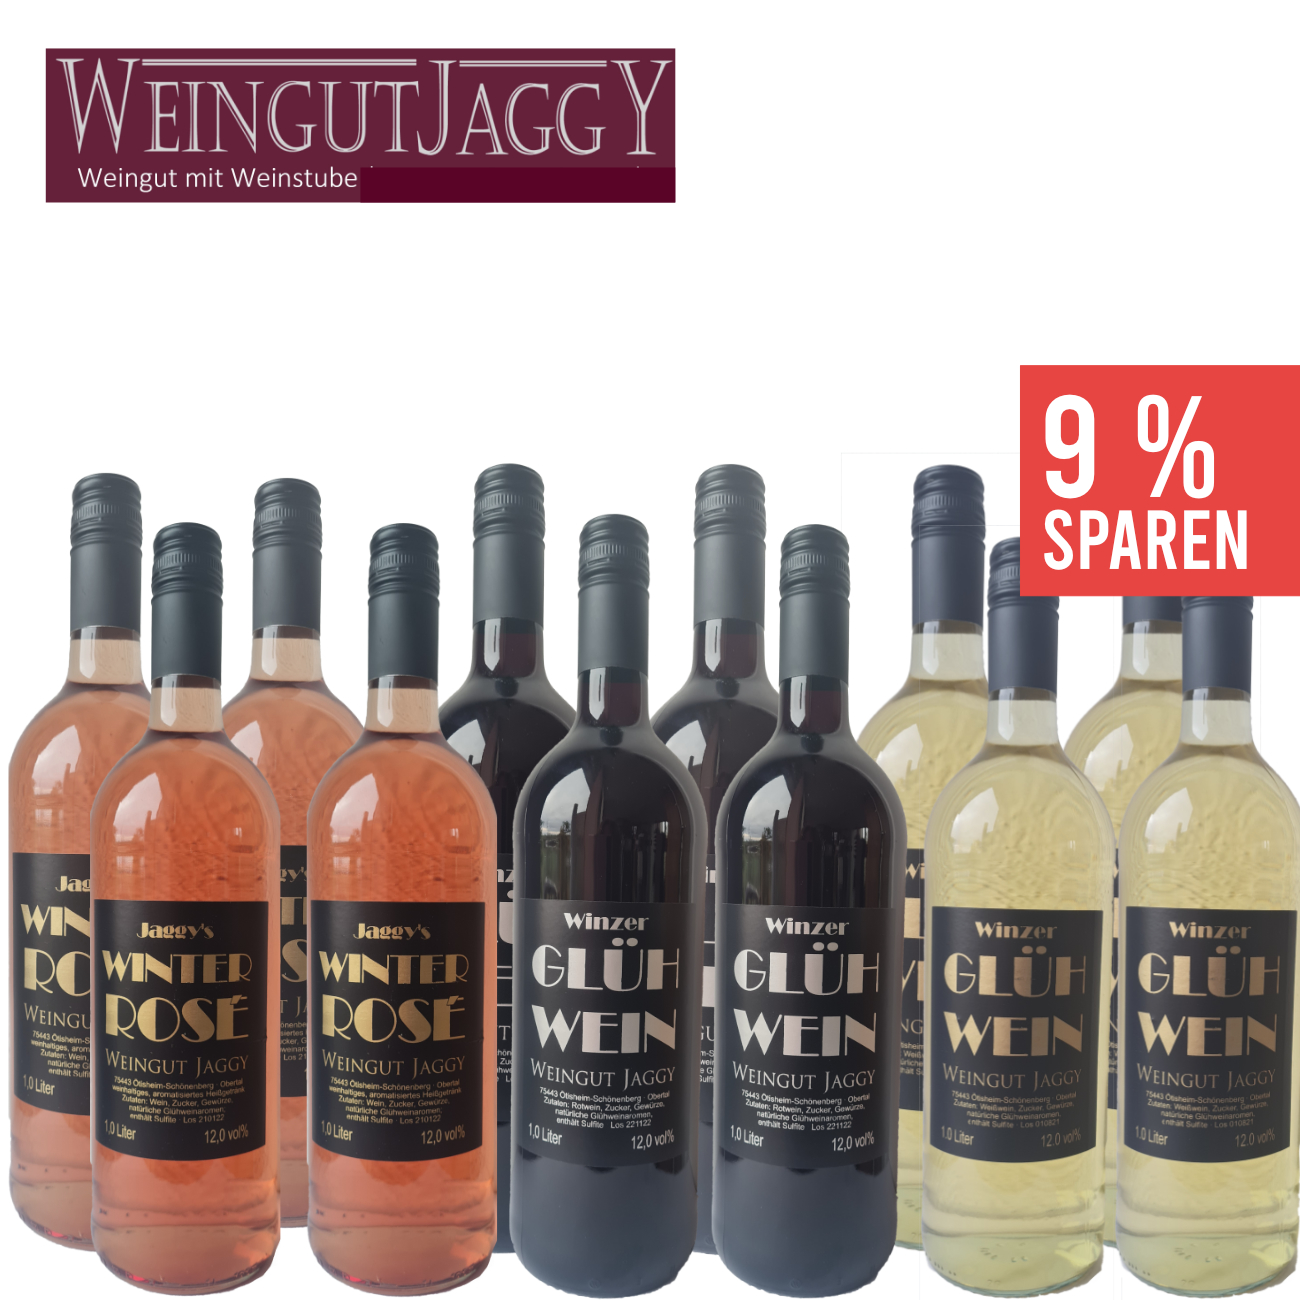 wein.plus find+buy: The members | wein.plus of our find+buy wines